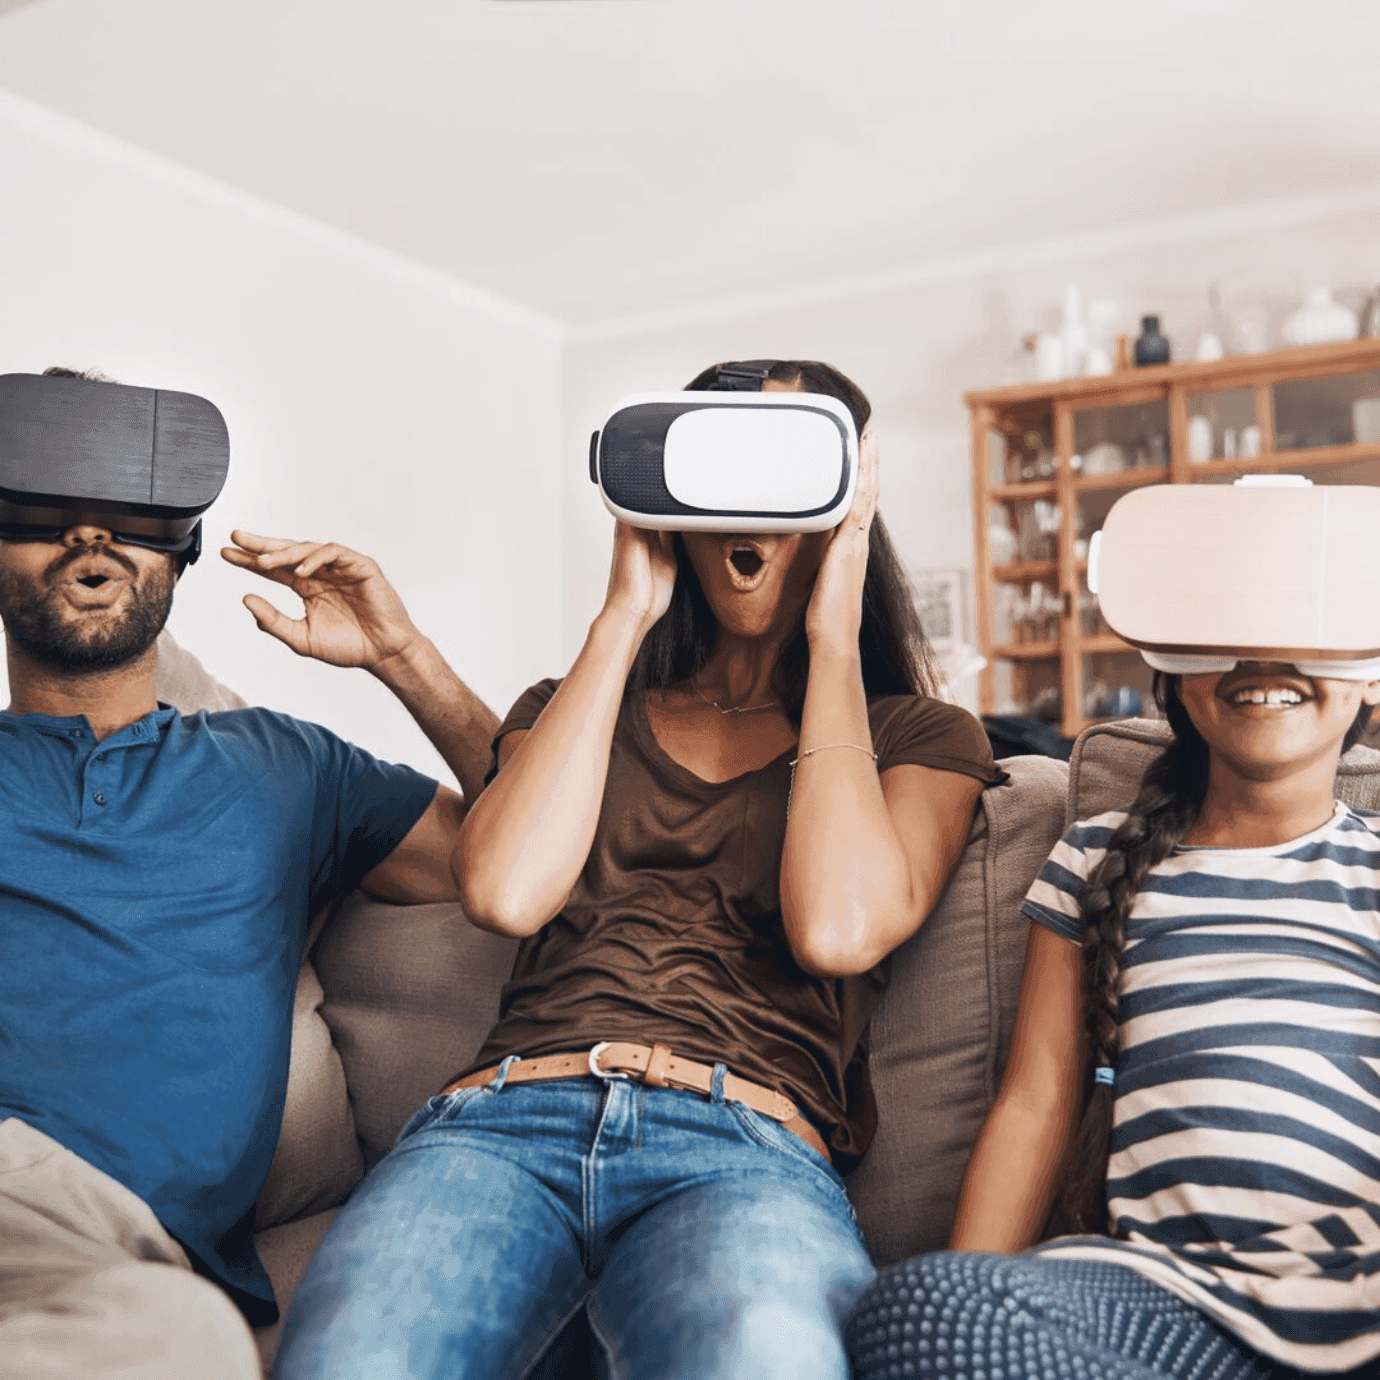 3 people using vr headset